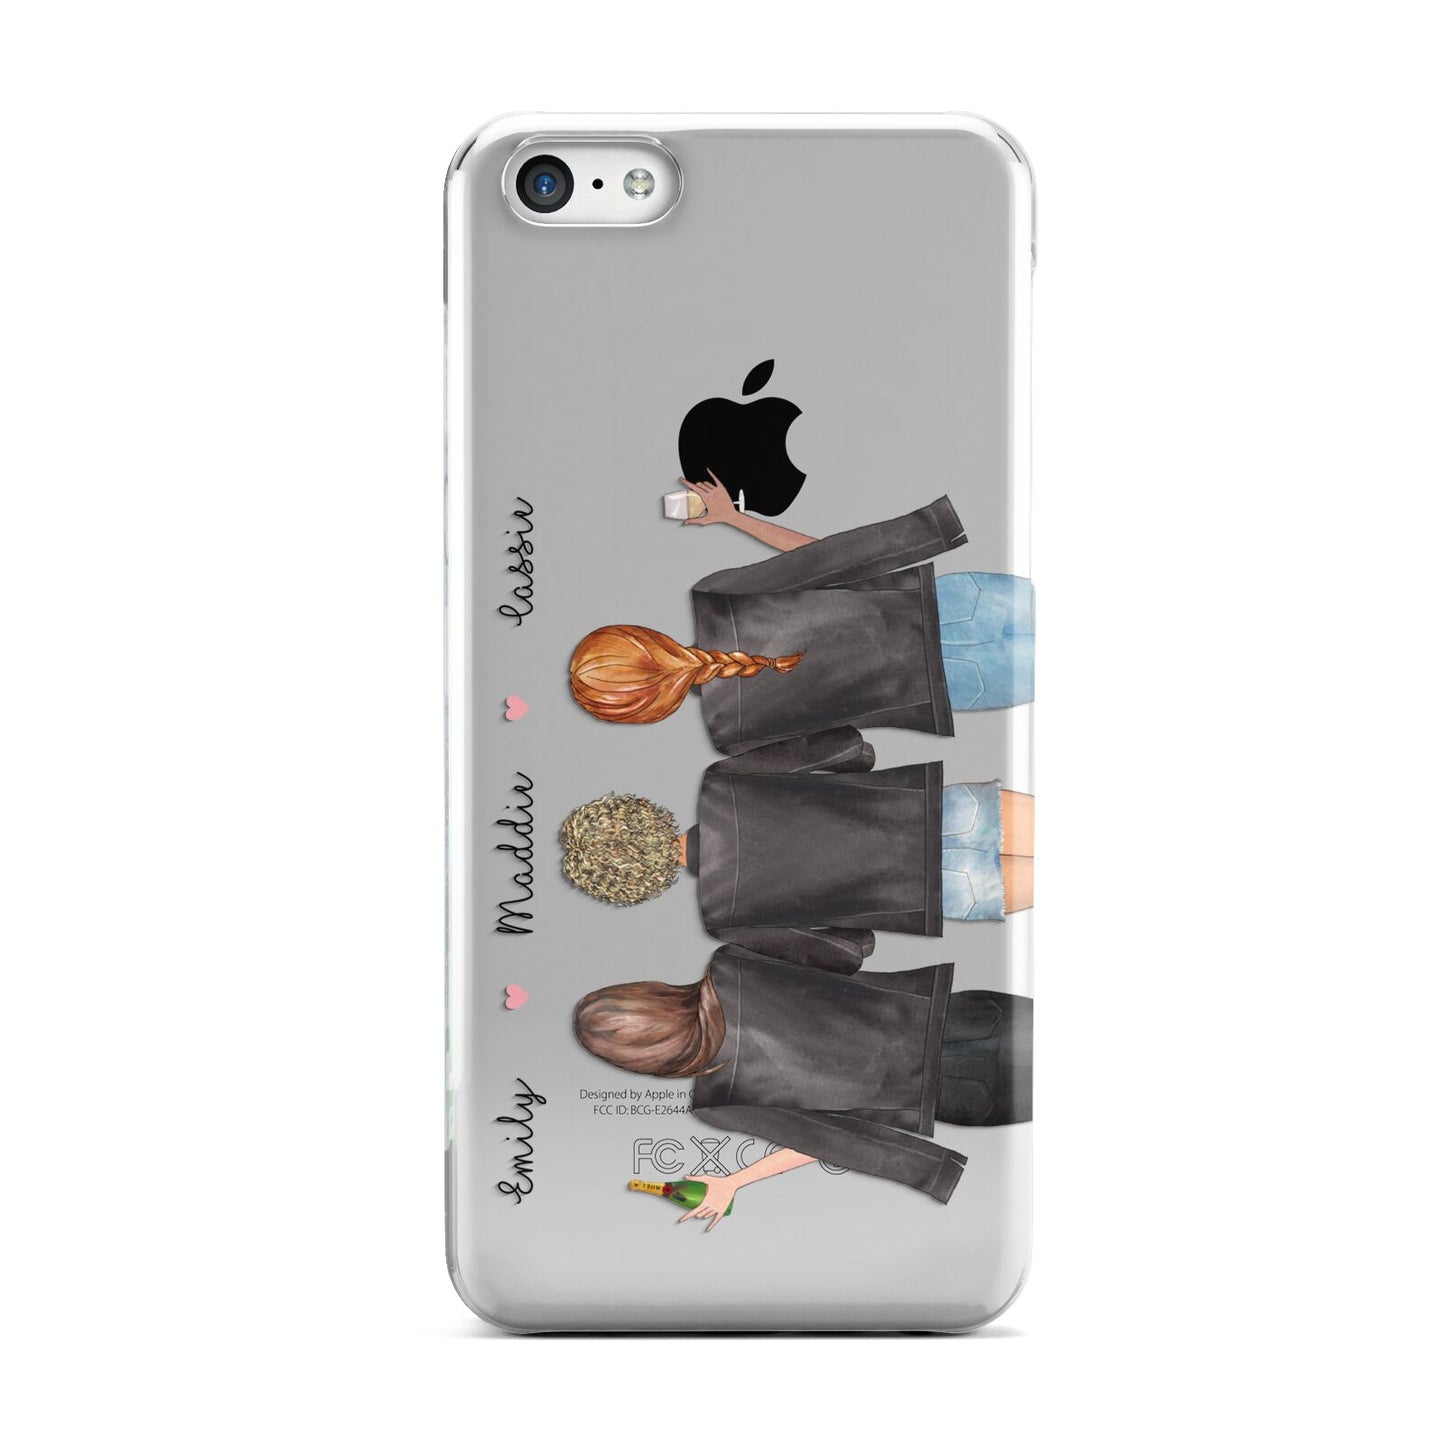 3 Best Friends with Names Apple iPhone 5c Case